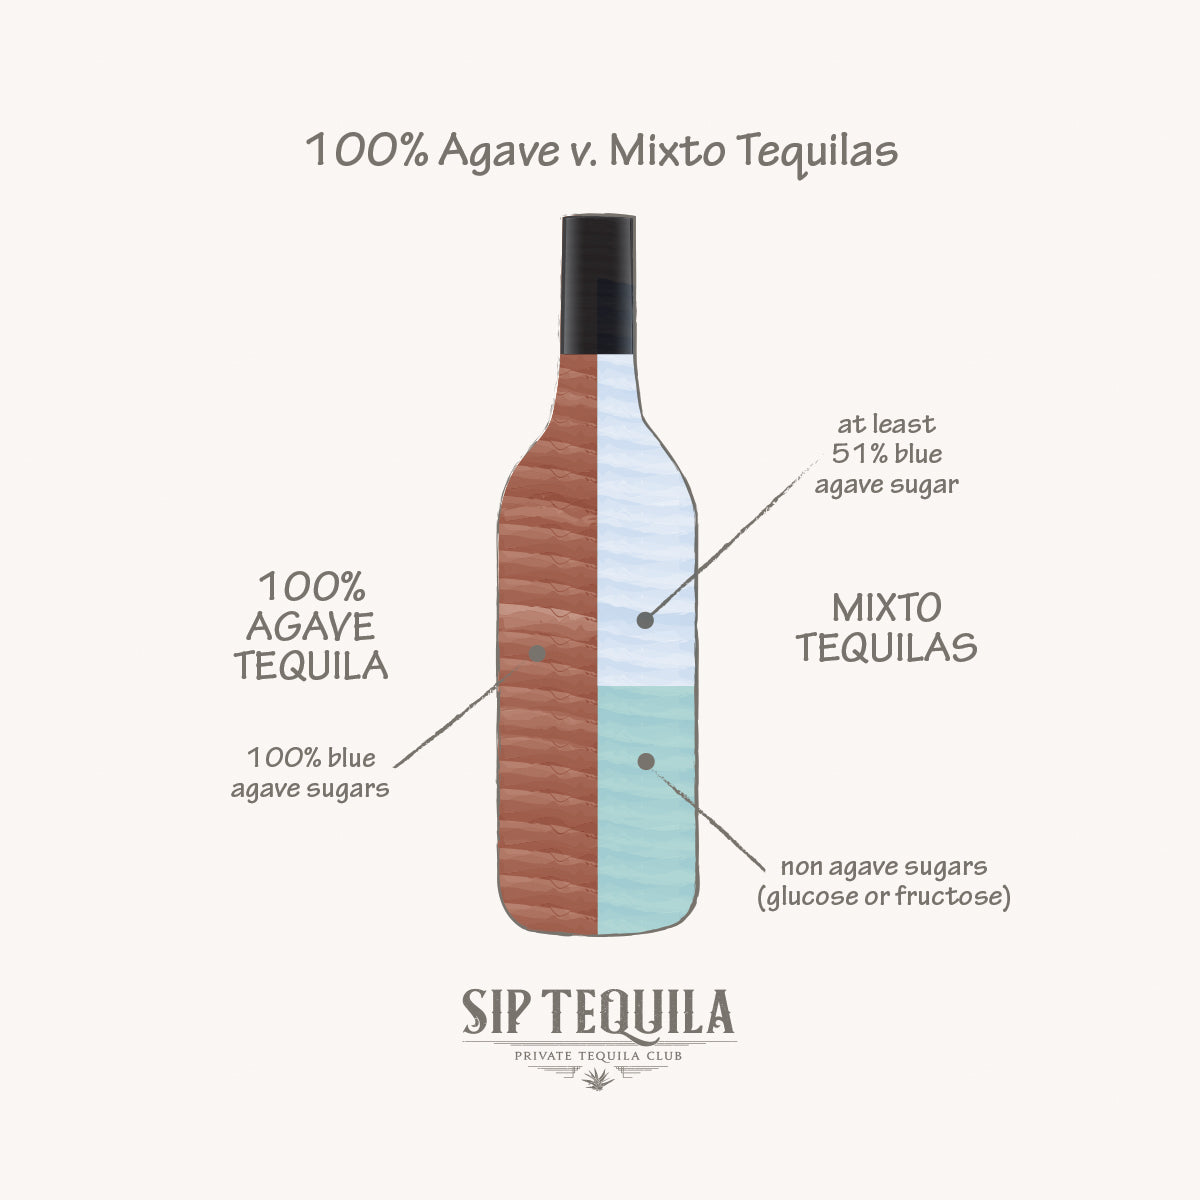 Agave vs Mixto Tequilas